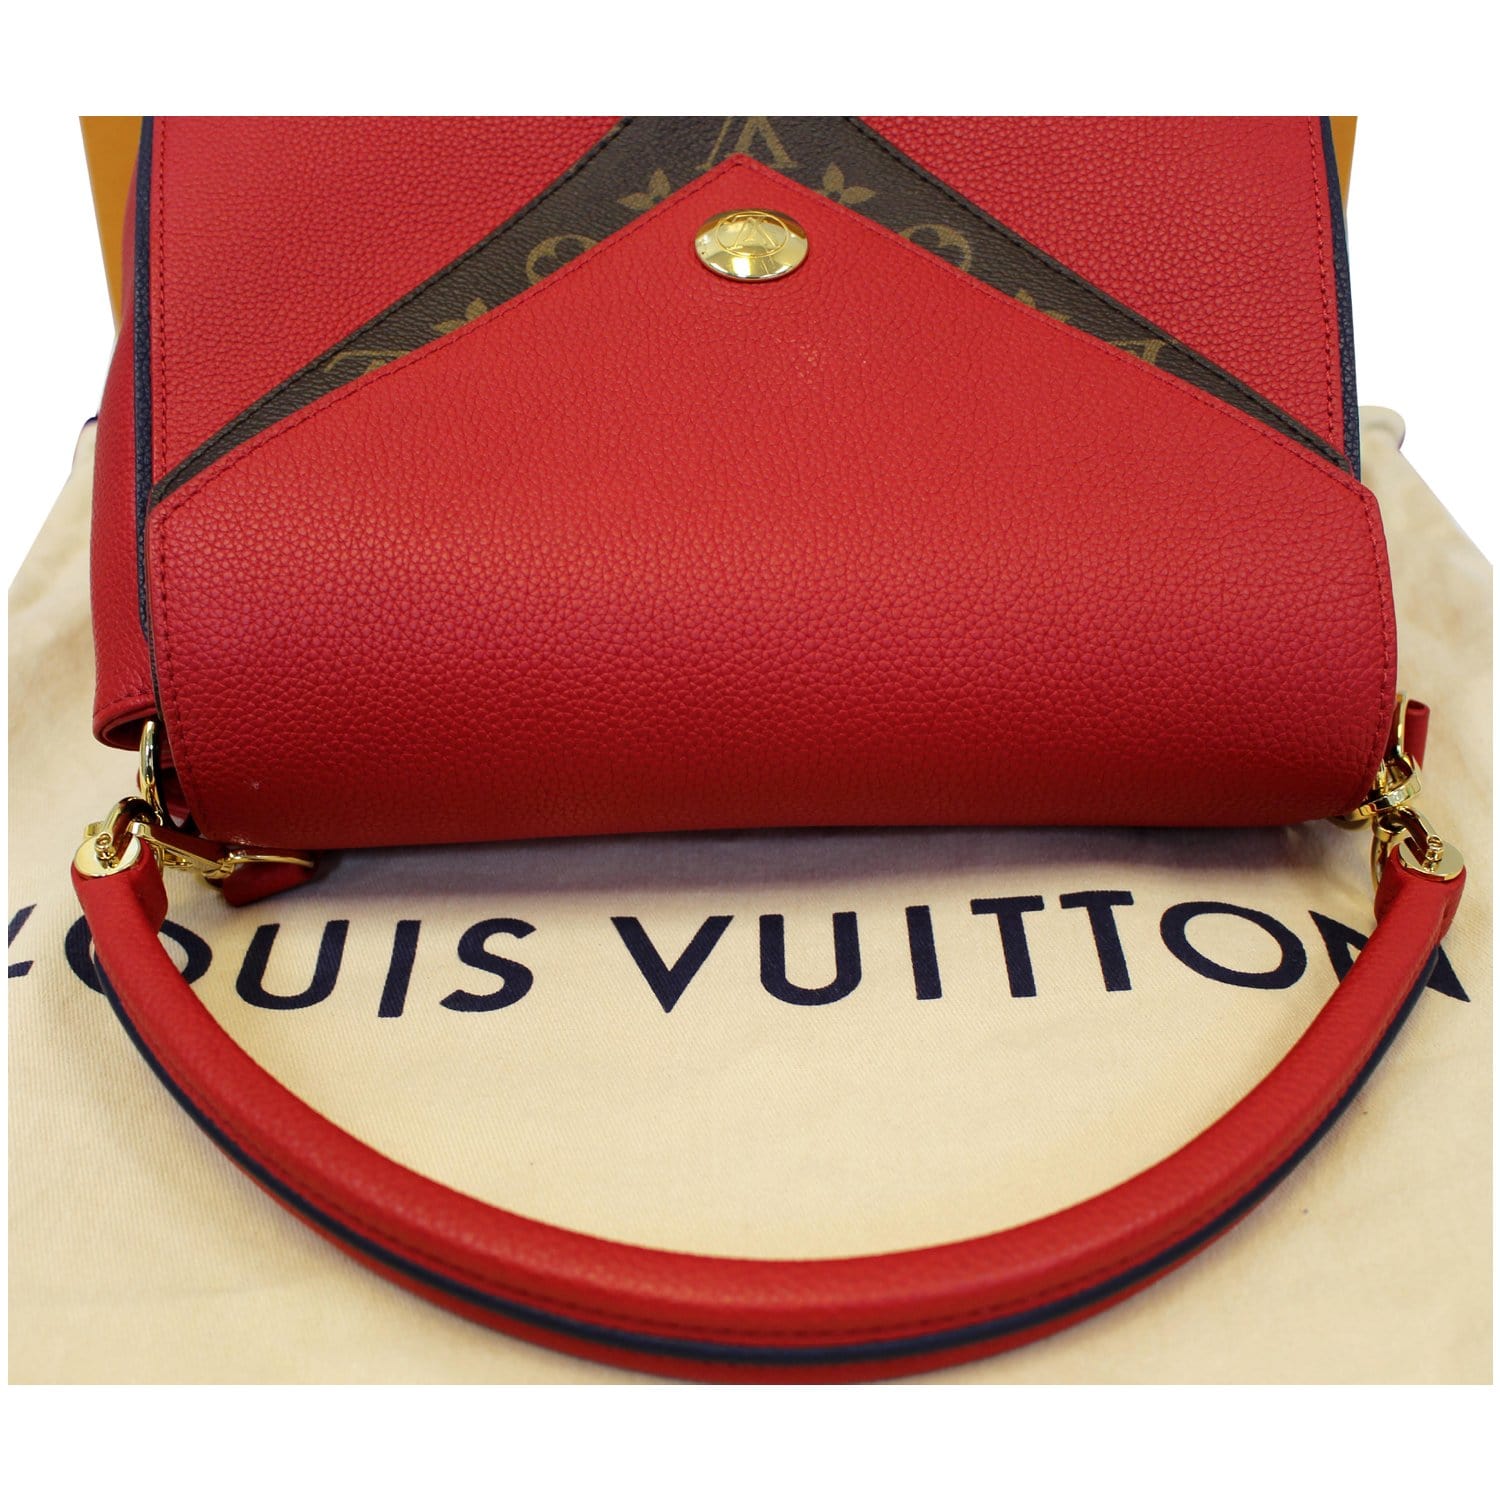 Louis Vuitton Brown/Red Leather and Monogram Canvas Double V Bag